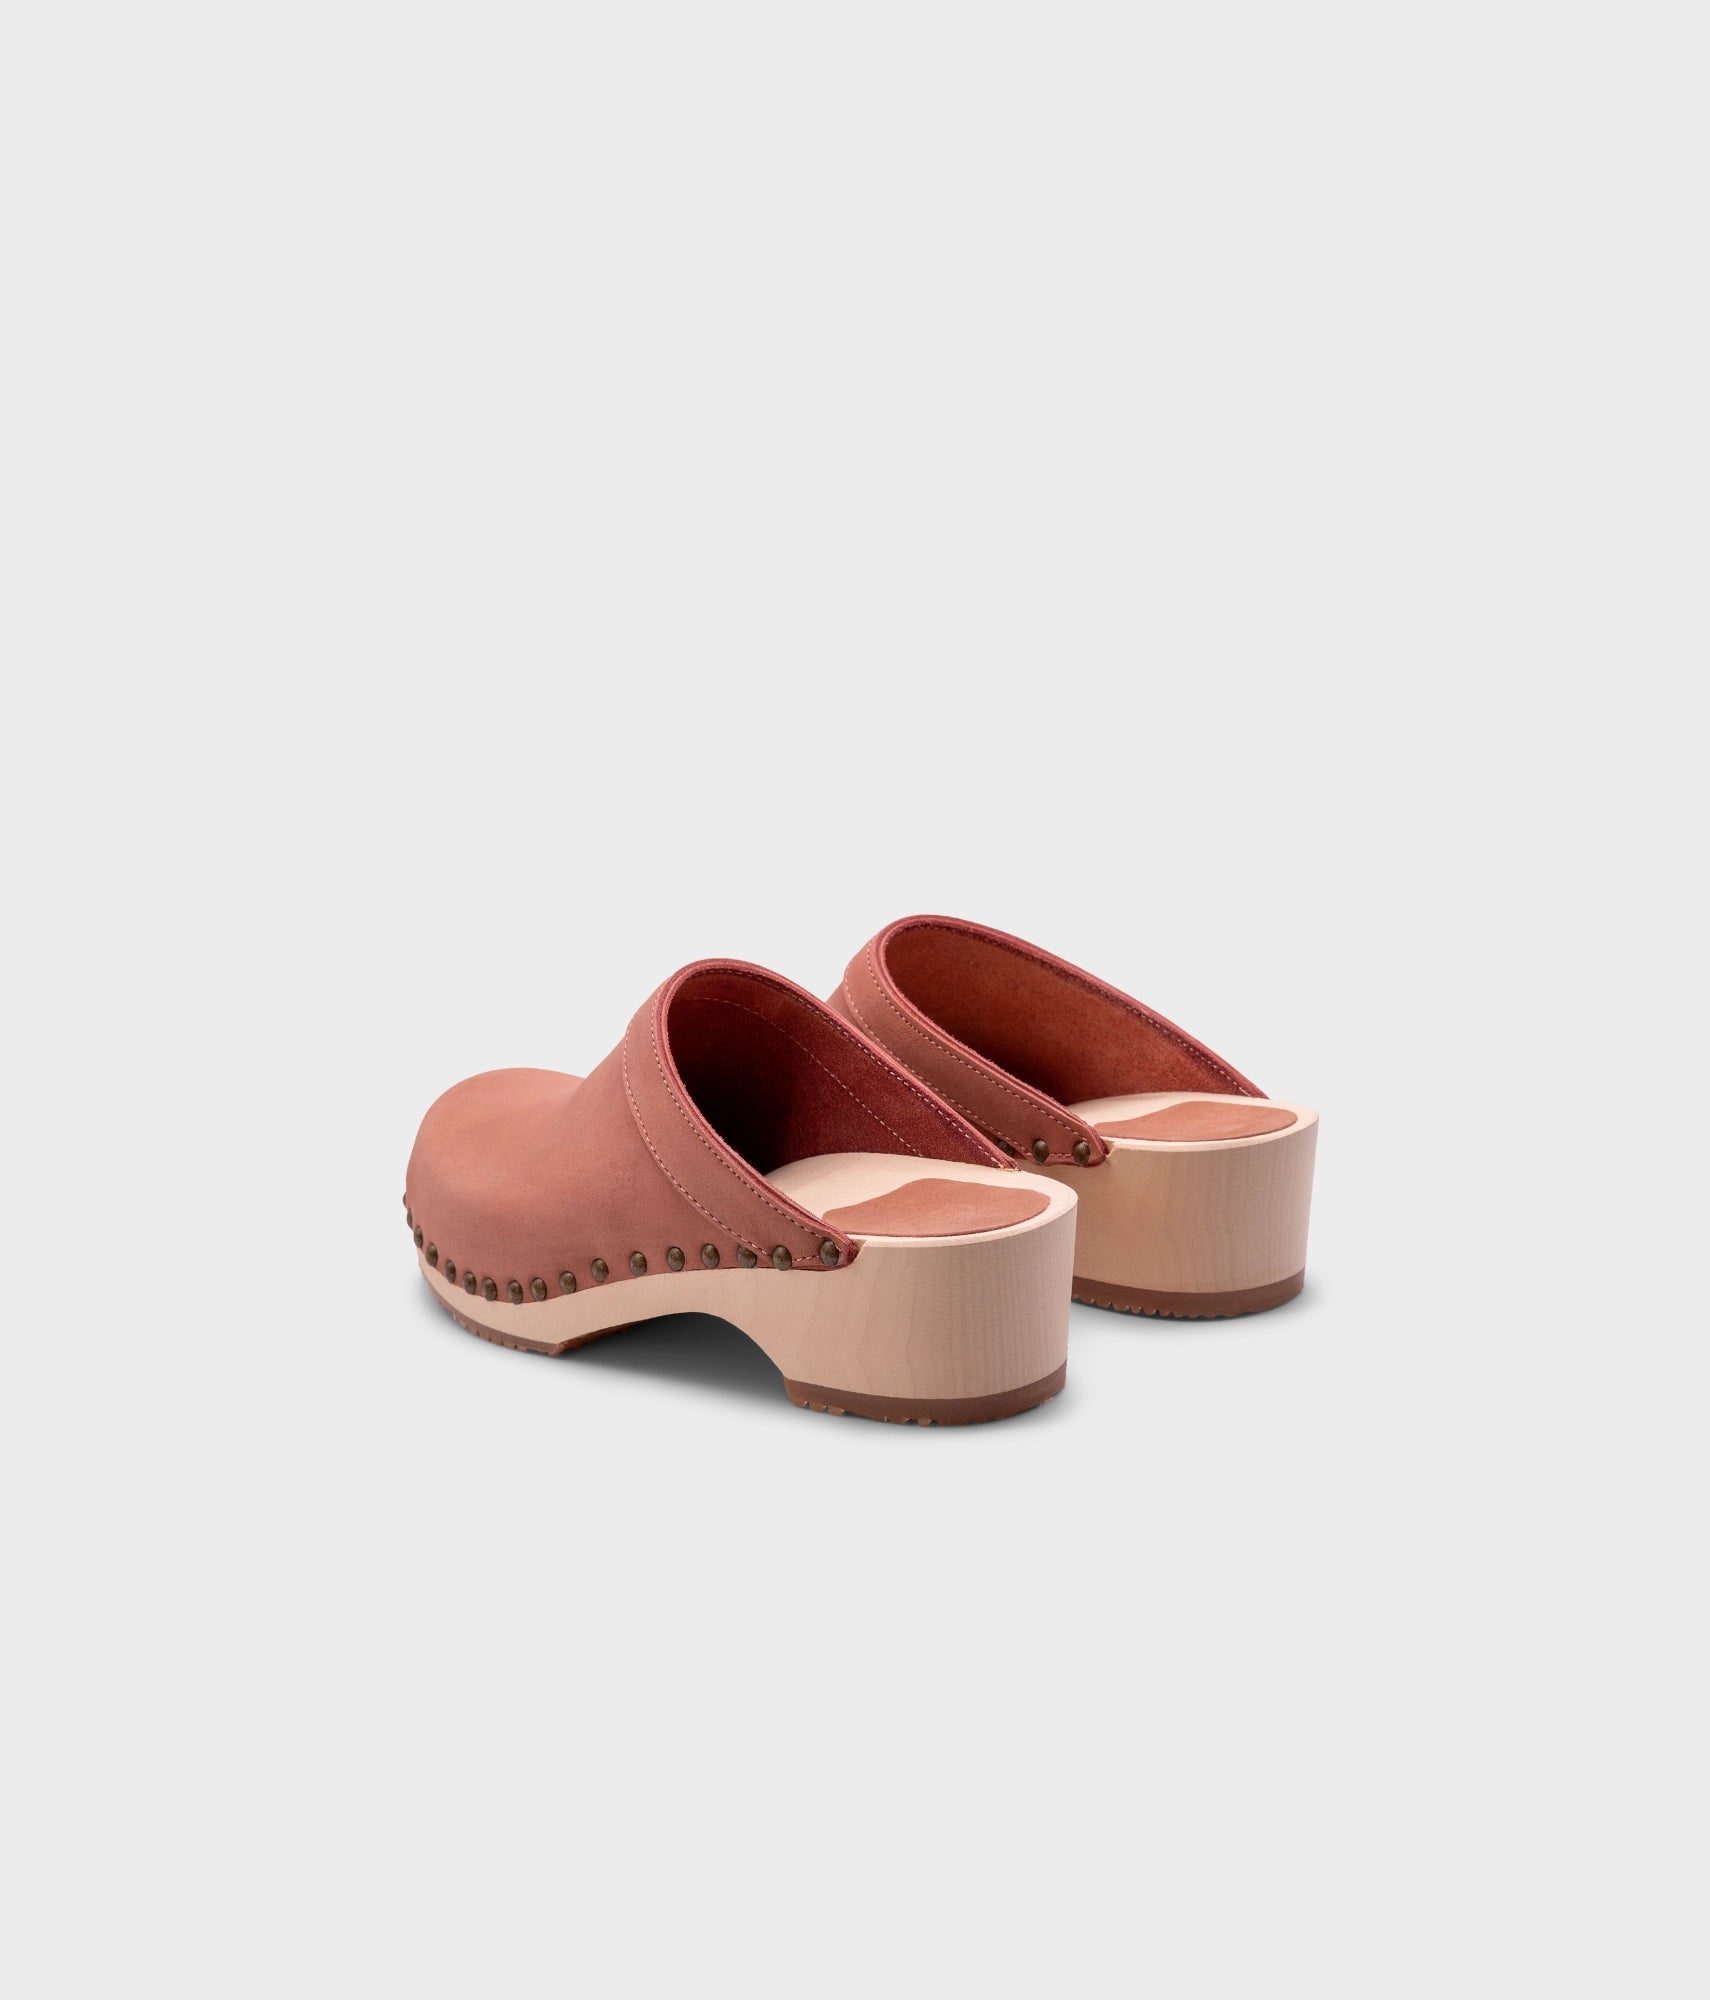 low heeled clog mules in blush pink nubuck leather stapled on a light wooden base with brass gold studs